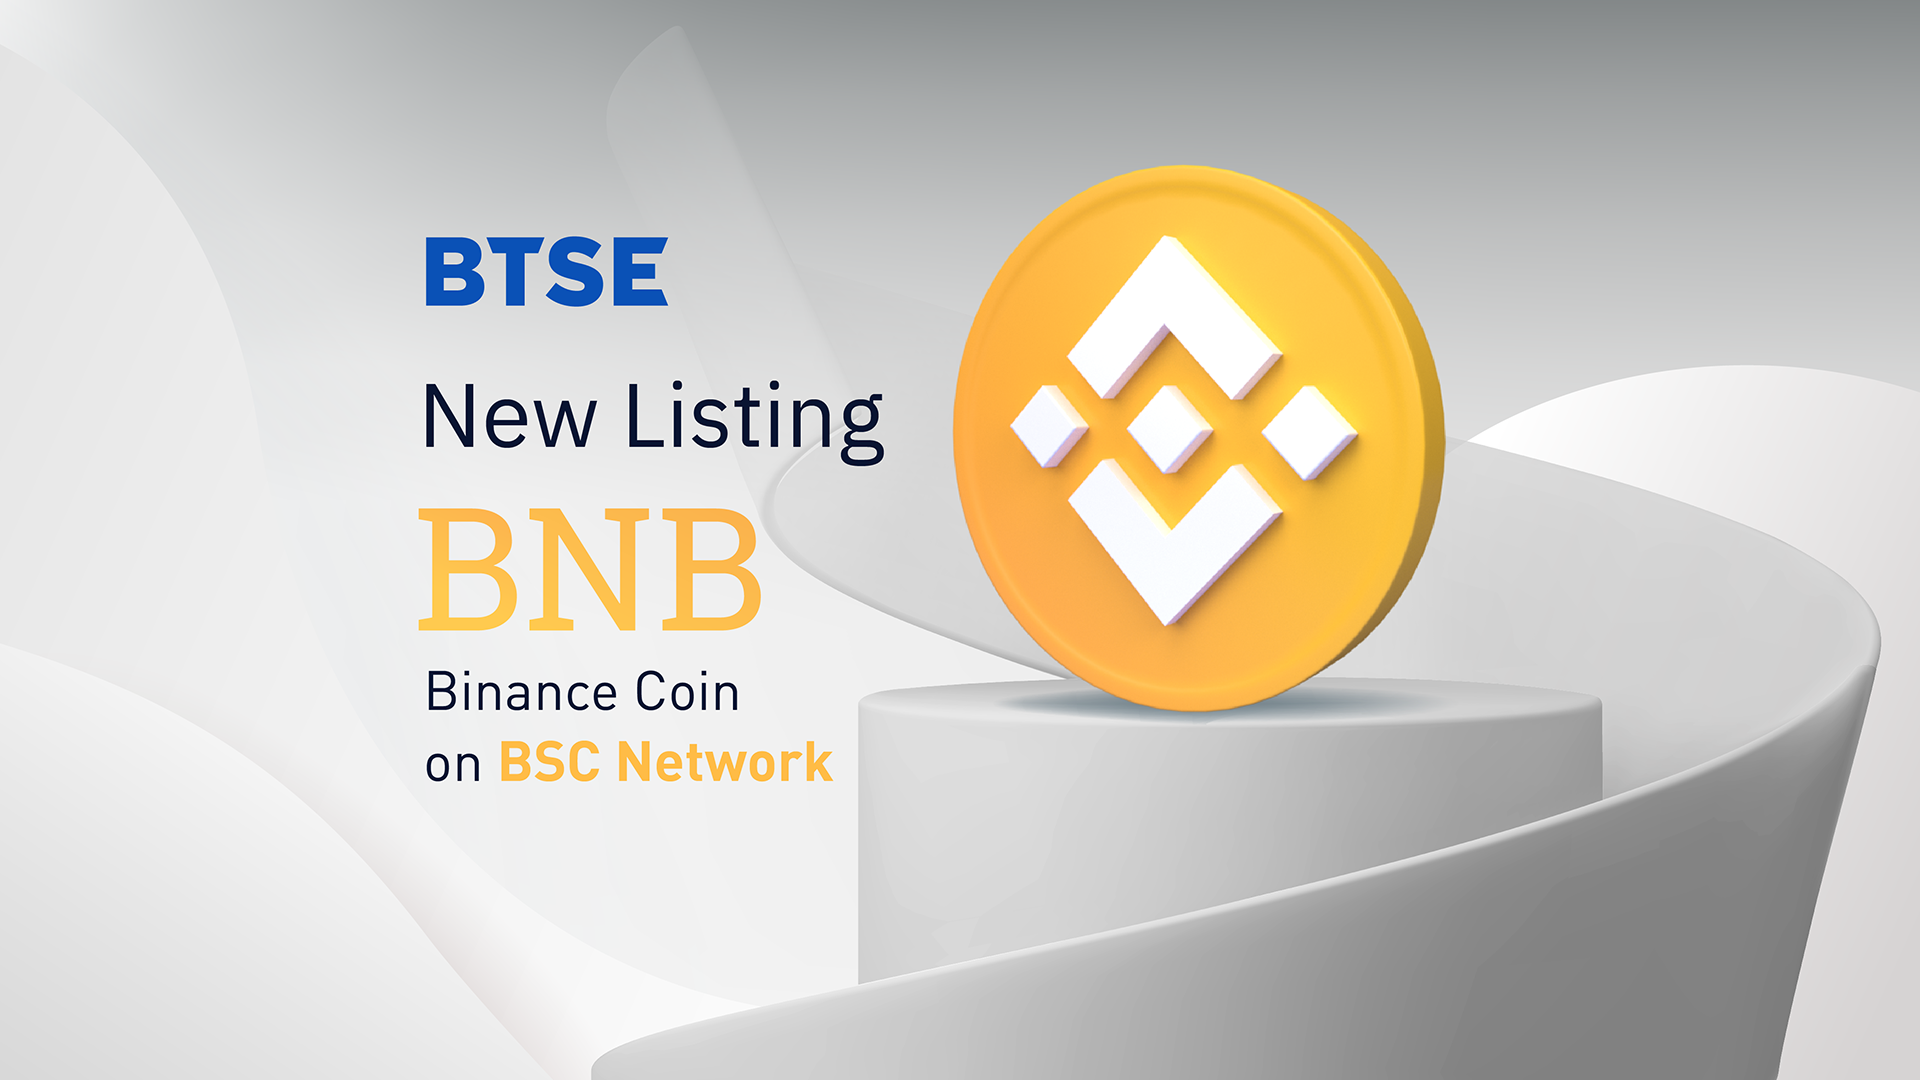 BTSE Integrates BSC, Welcomes BNB Listing